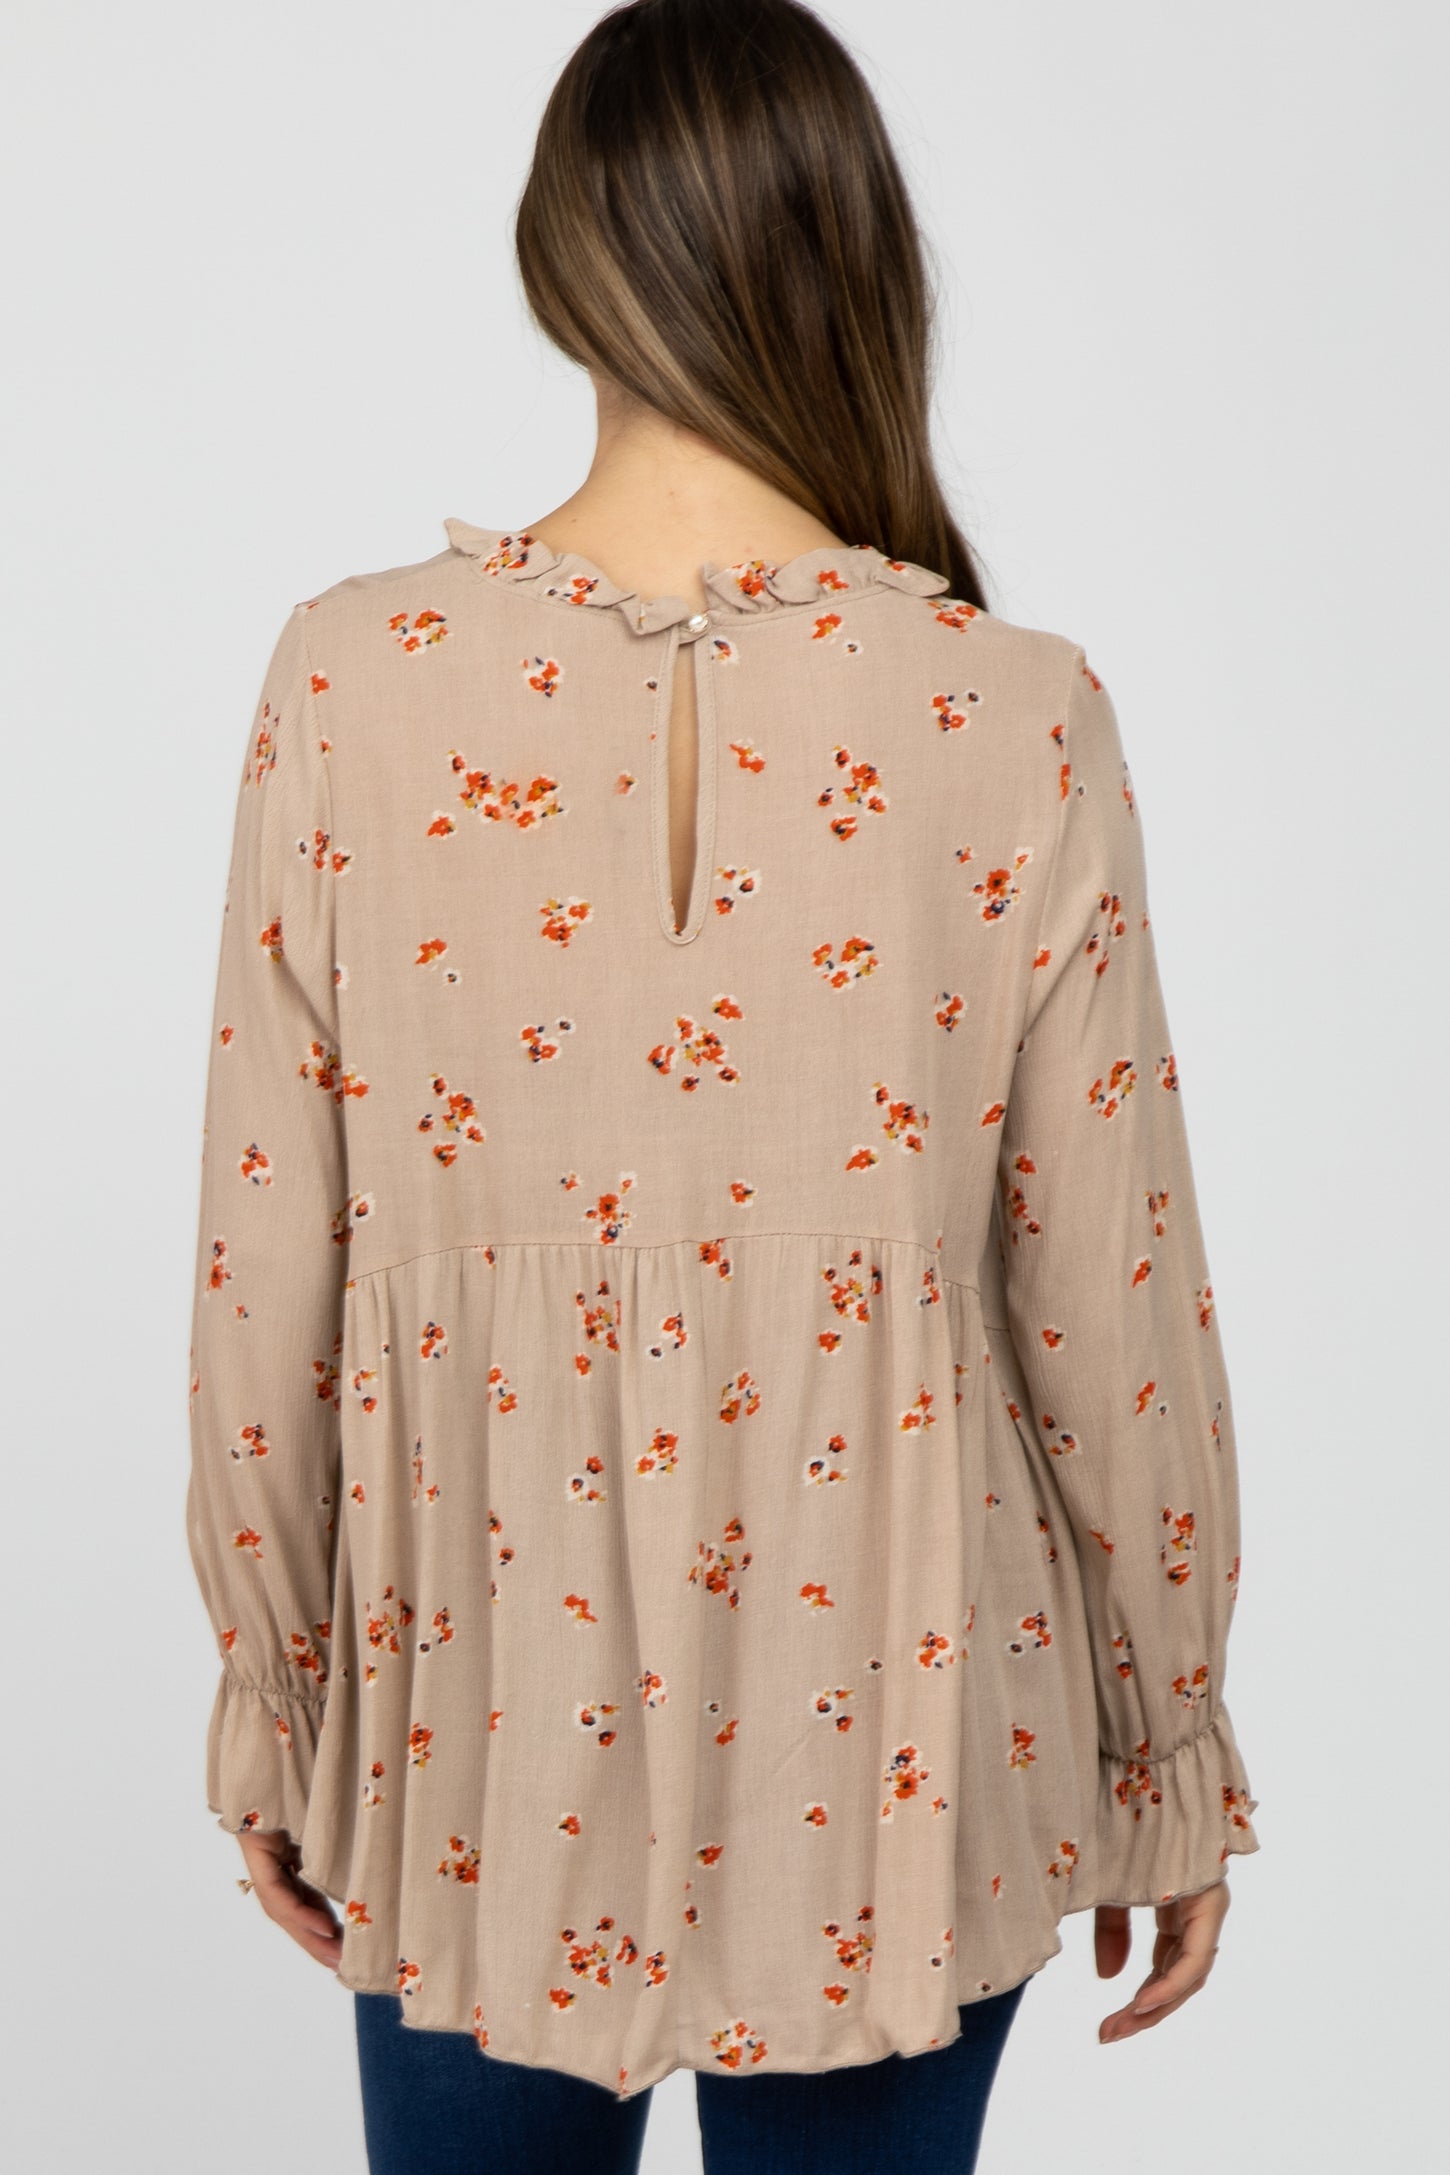 Taupe Floral Babydoll Maternity Blouse